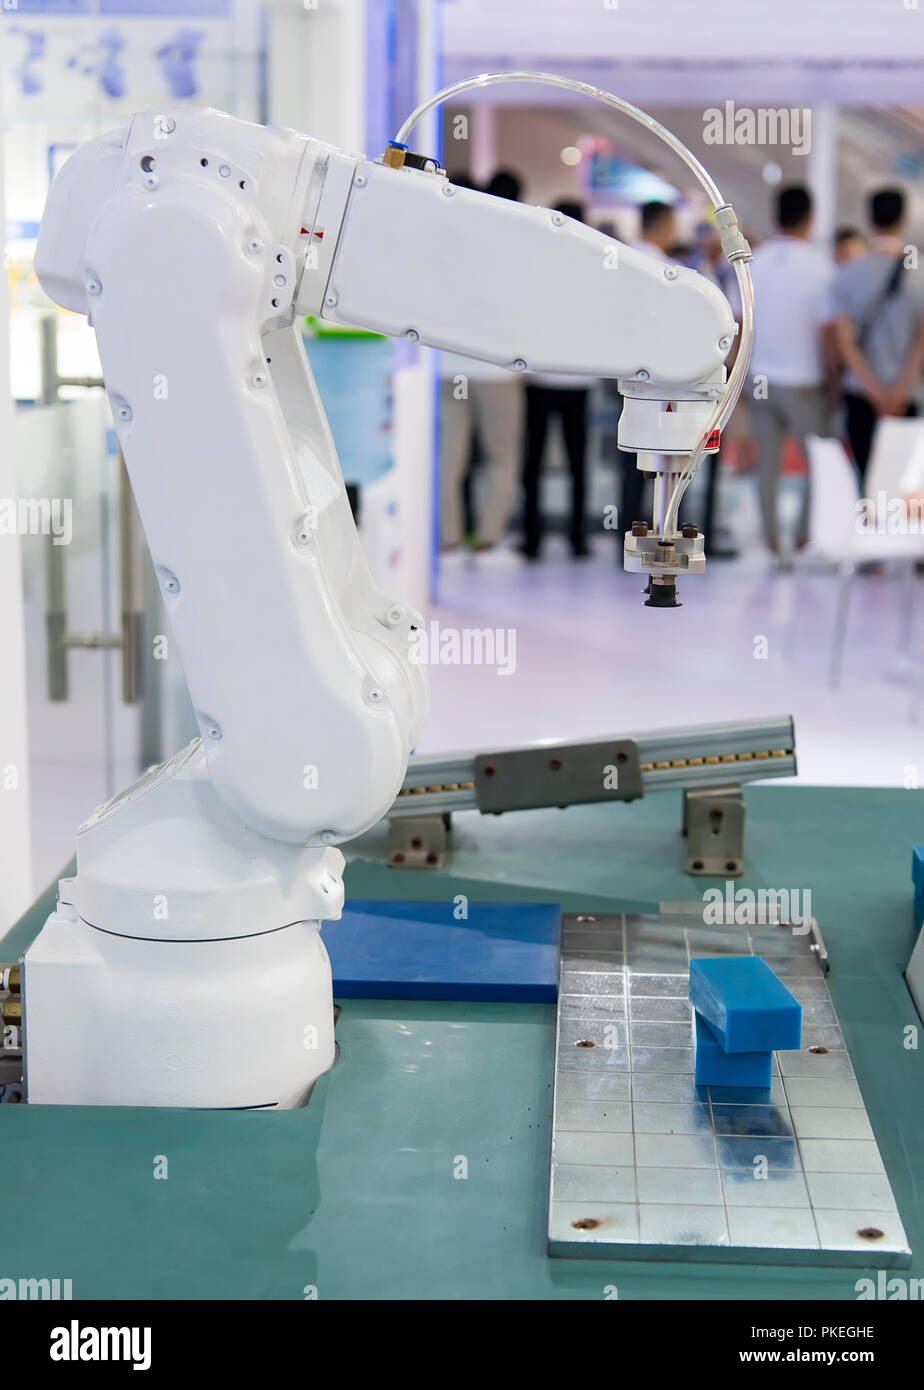 robot machine tool in industrial manufacture plant,Smart factory industry 4.0 concept. Stock Photo